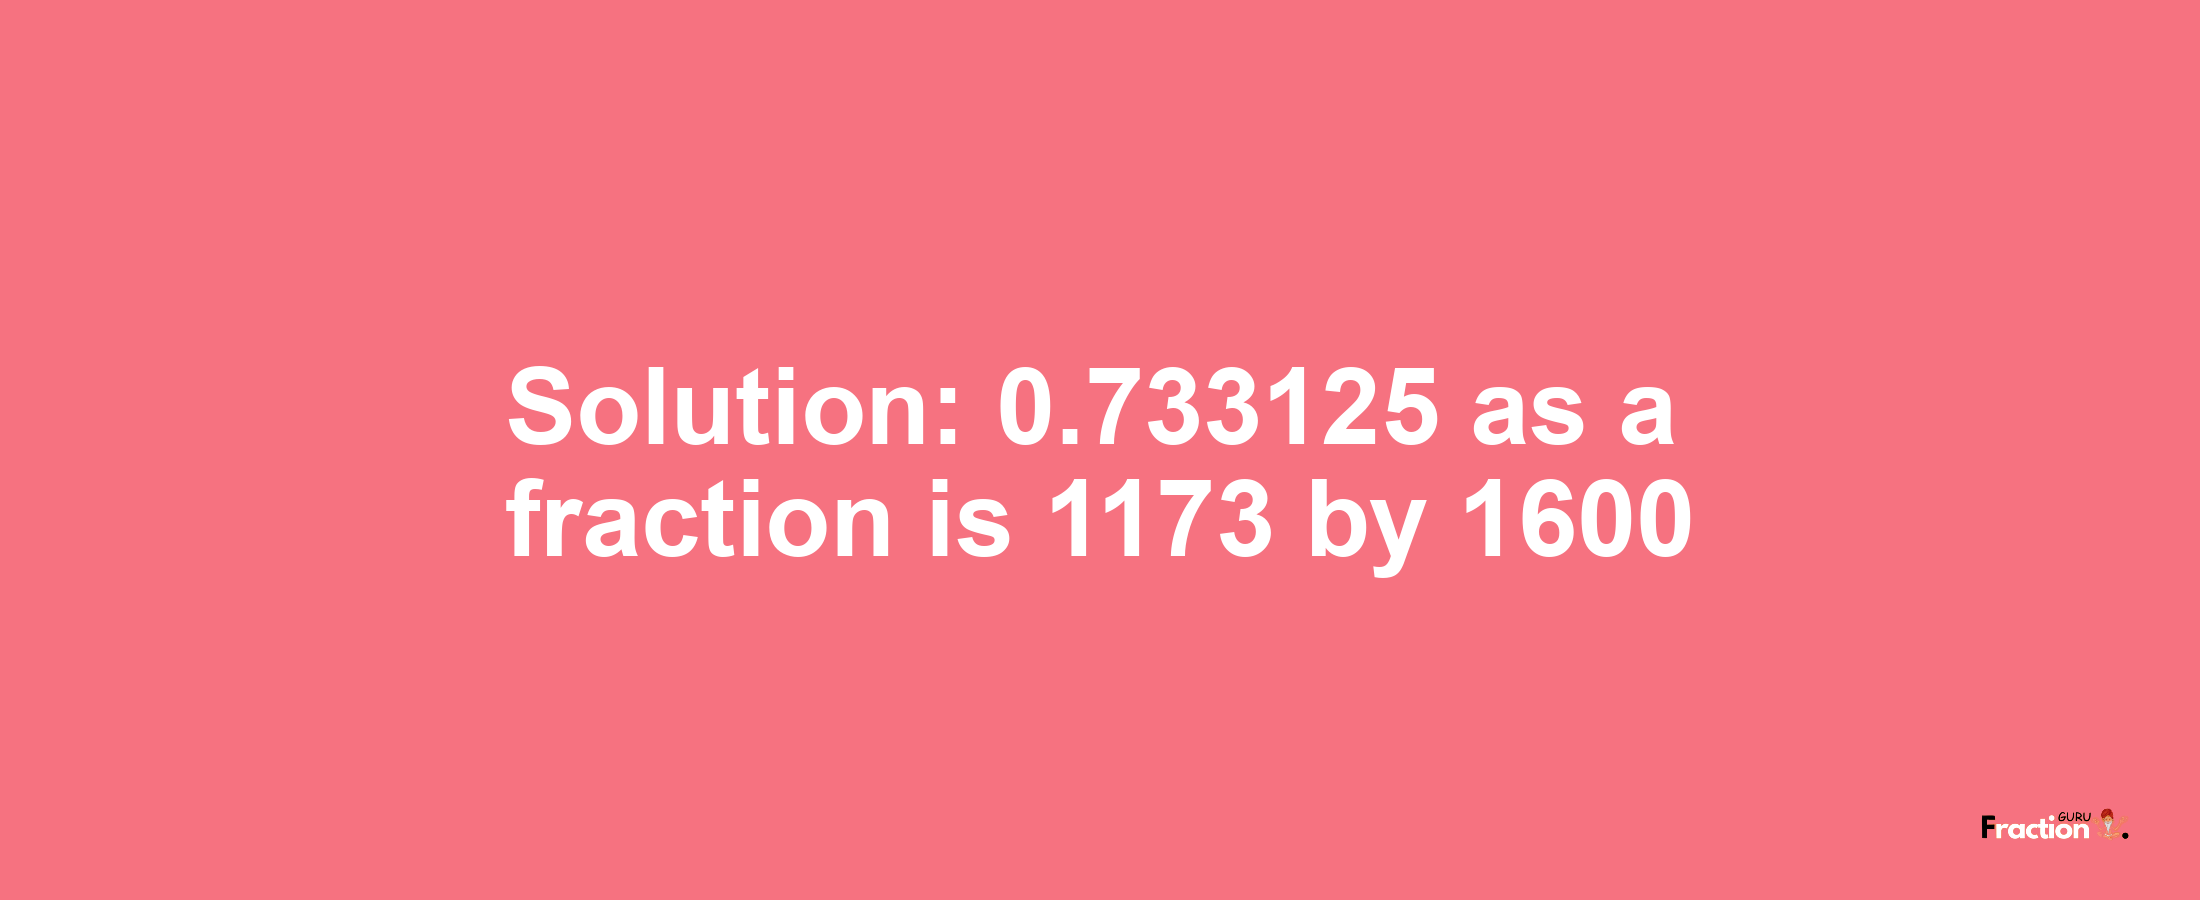 Solution:0.733125 as a fraction is 1173/1600